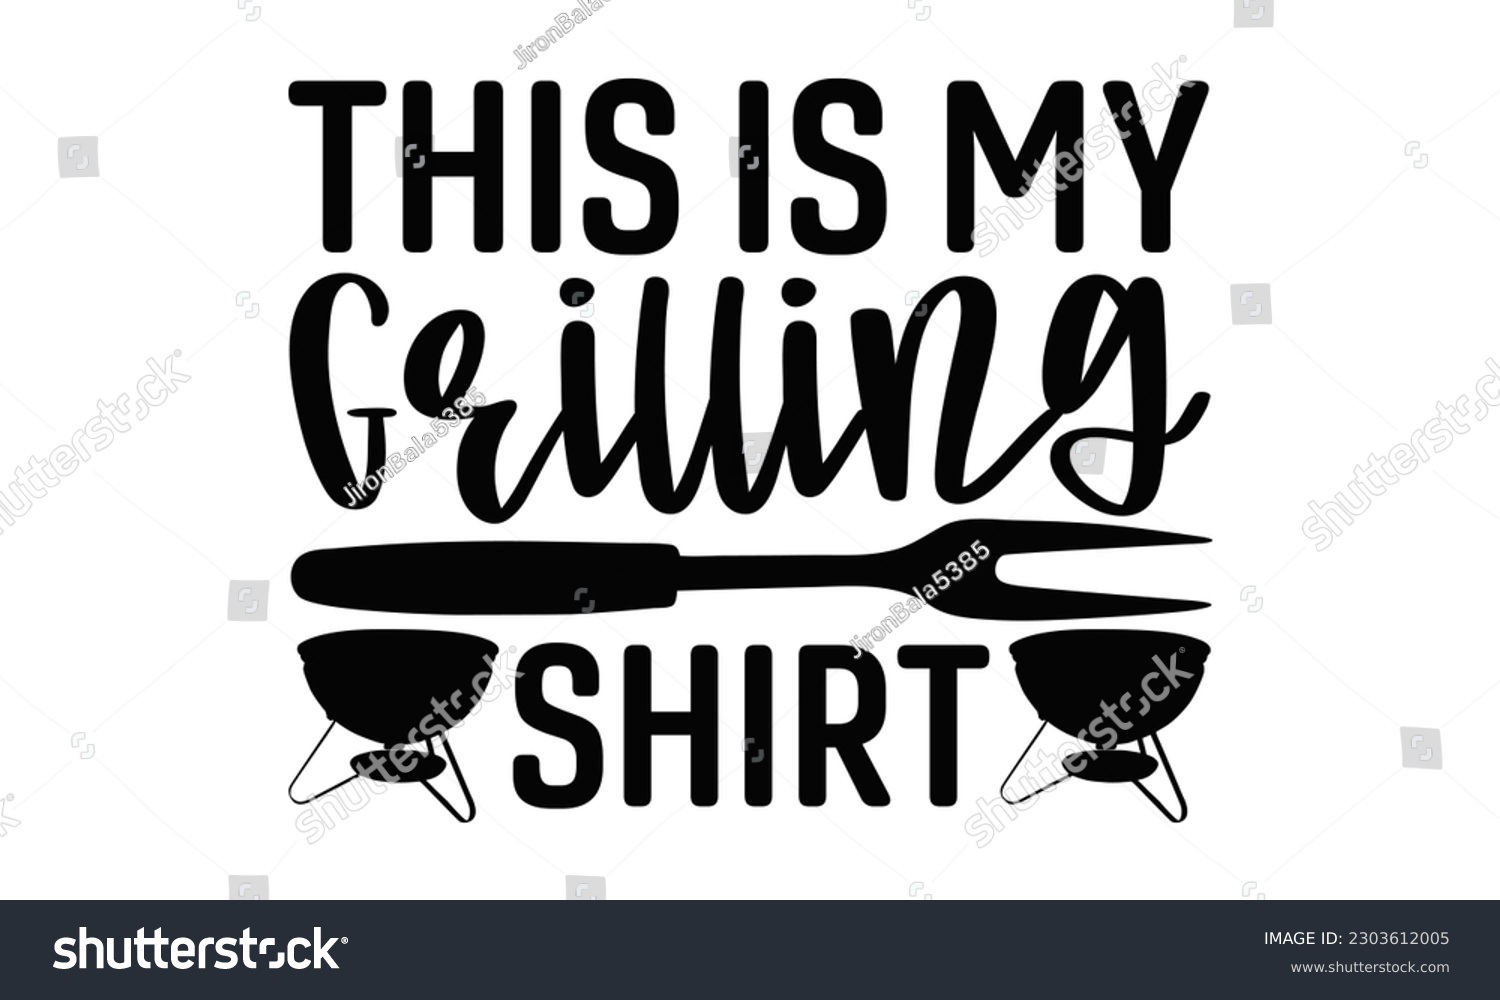 SVG of  This Is My Grilling Shirt - Barbecue SVG Design, Hand drawn vintage illustration with hand-lettering and decoration elements with, SVG Files for Cutting.
 svg